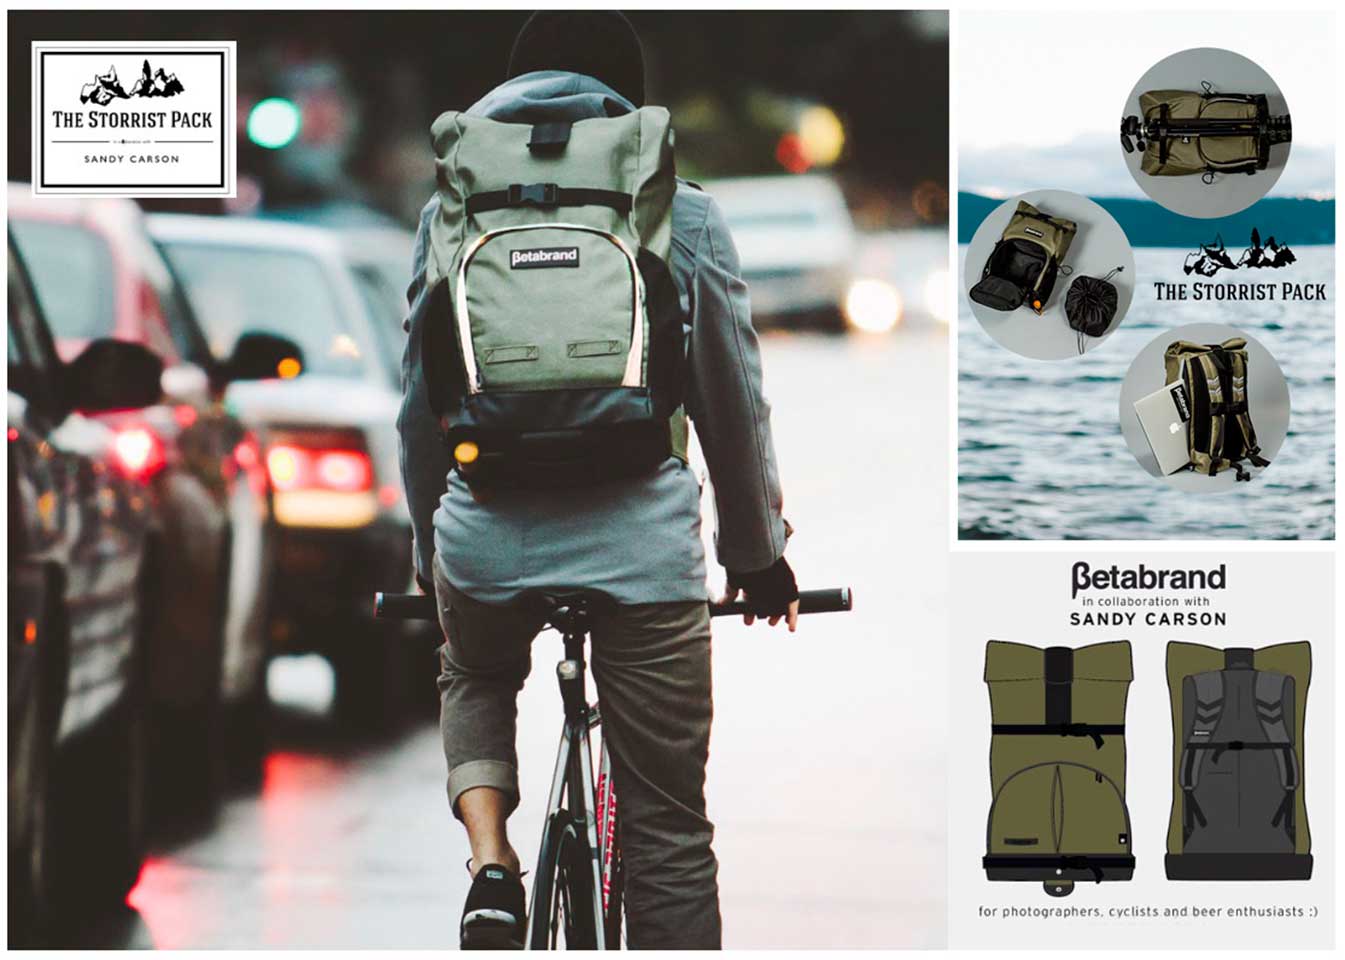 Signature camera/cycling backpack in collaboration with Betabrand